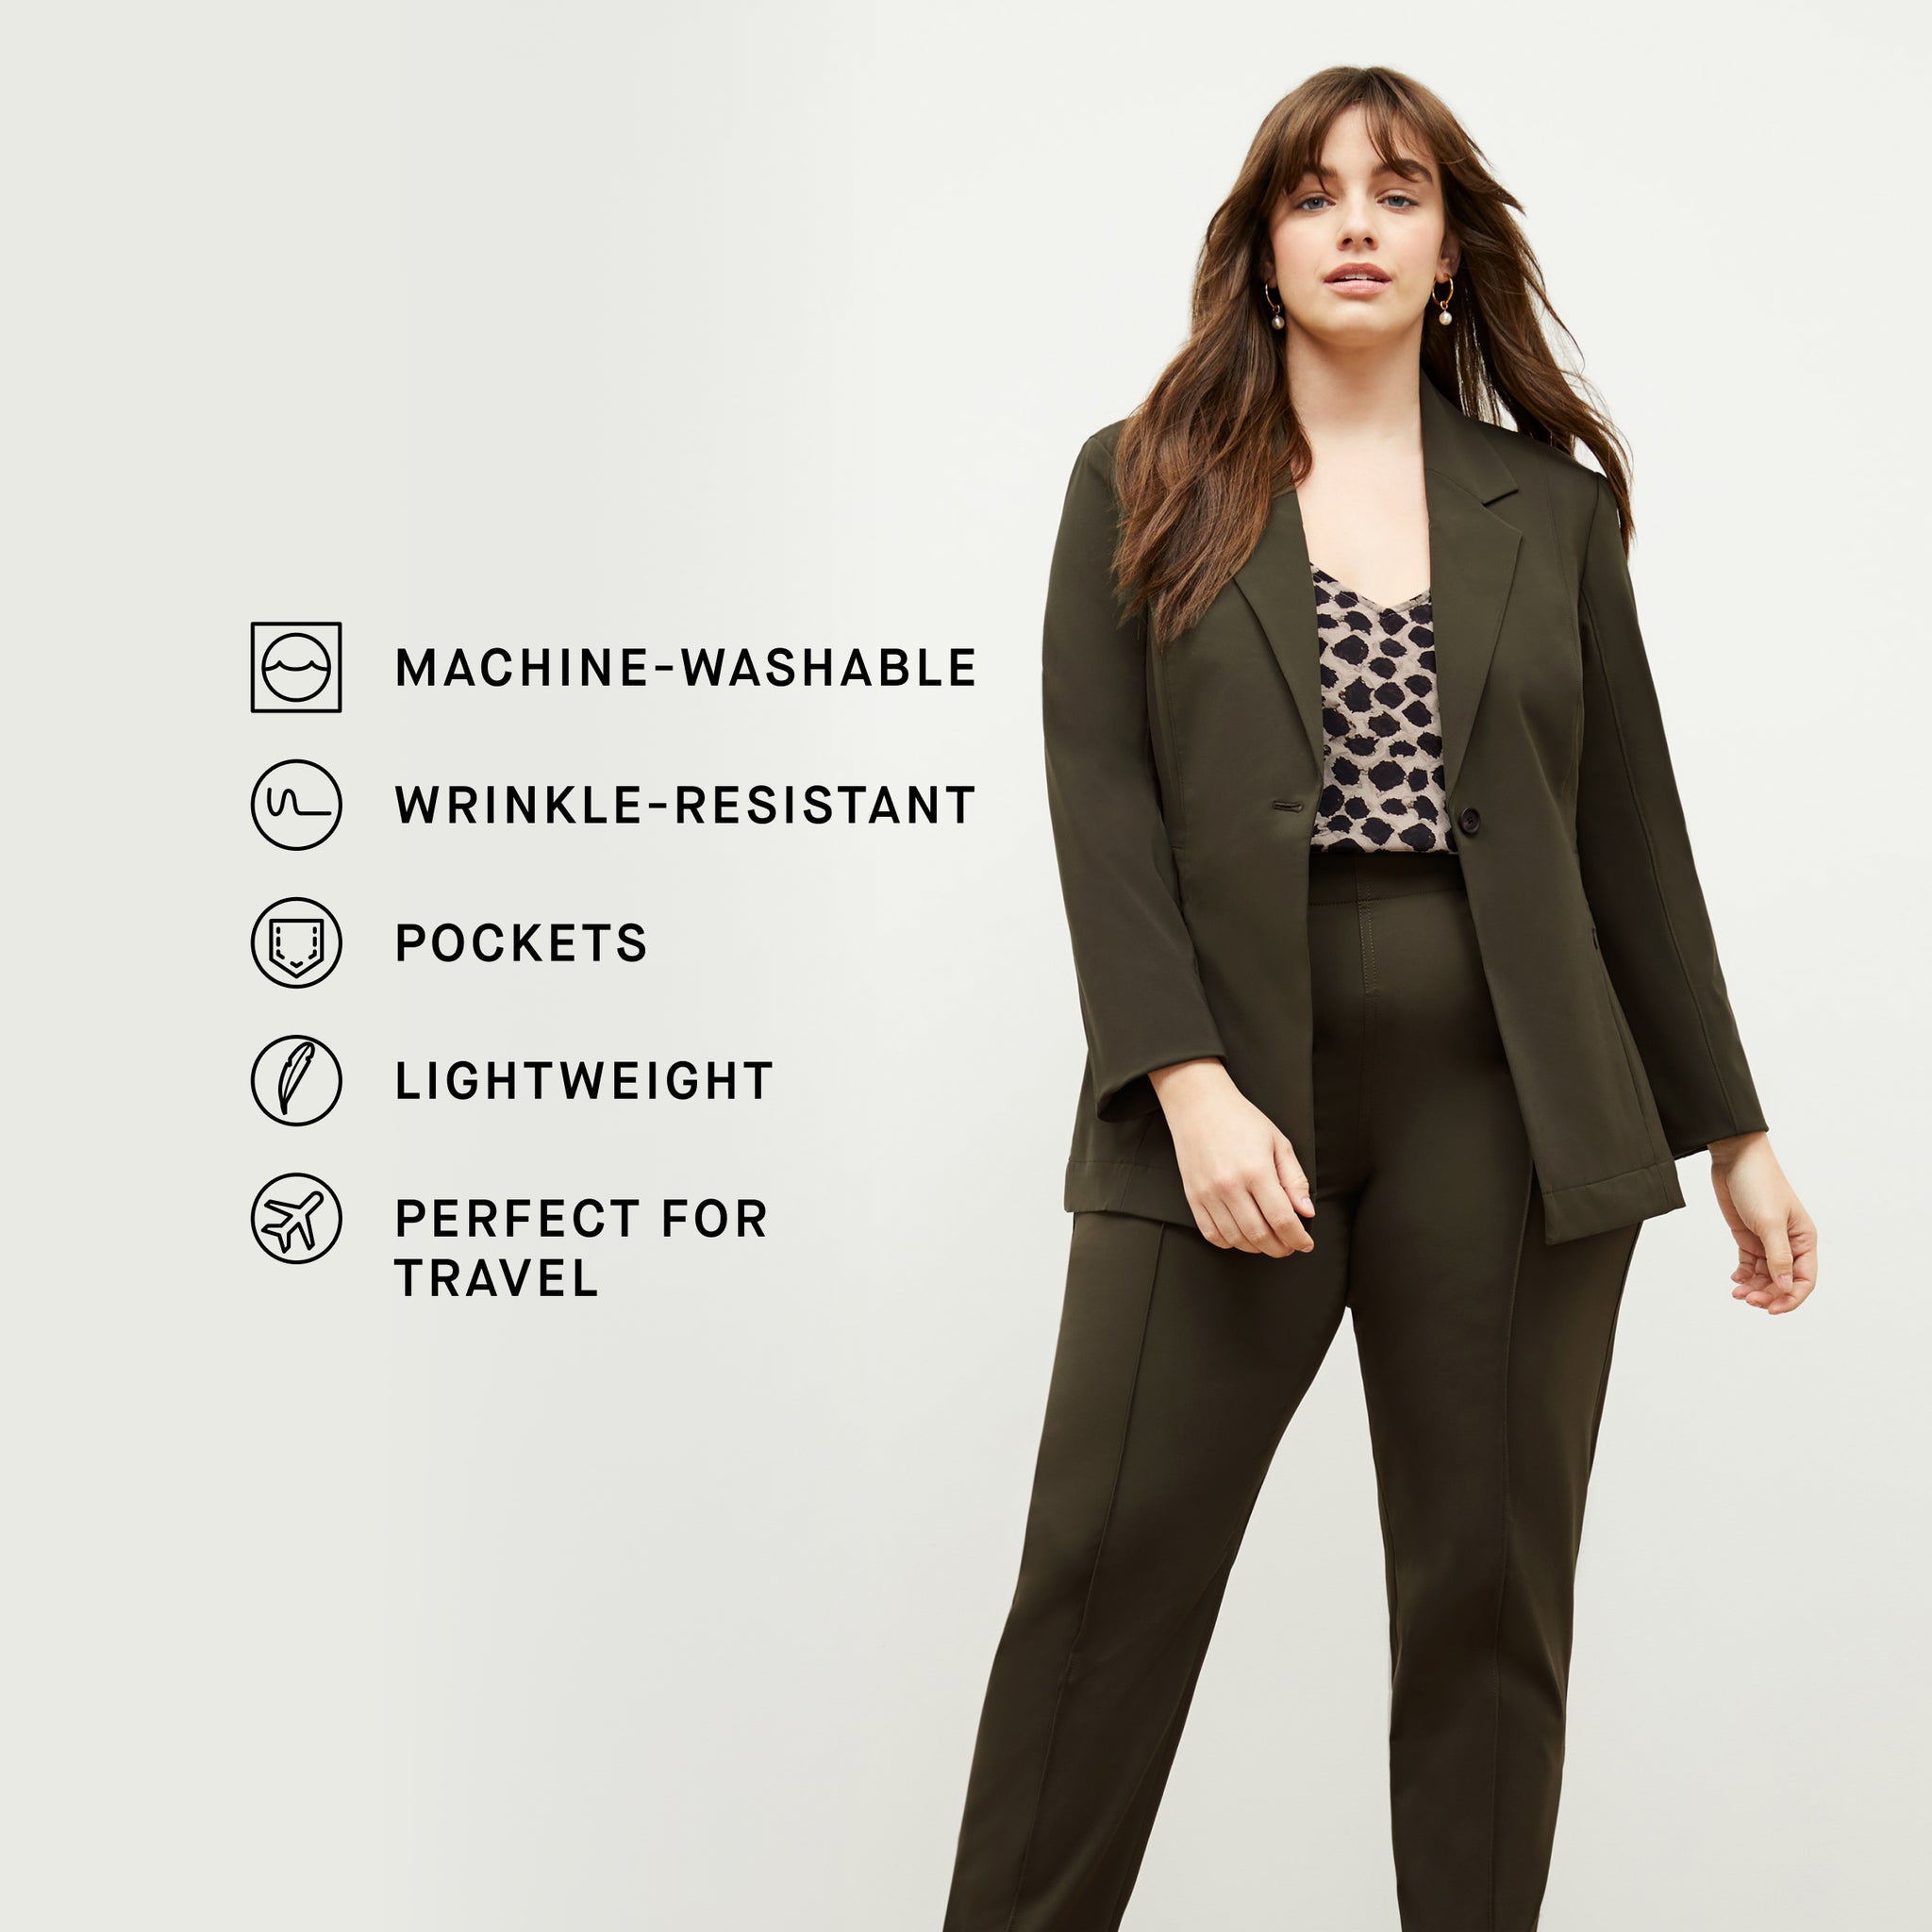 Front image of a woman standing wearing the Moreland jacket in olive with the product features listed 